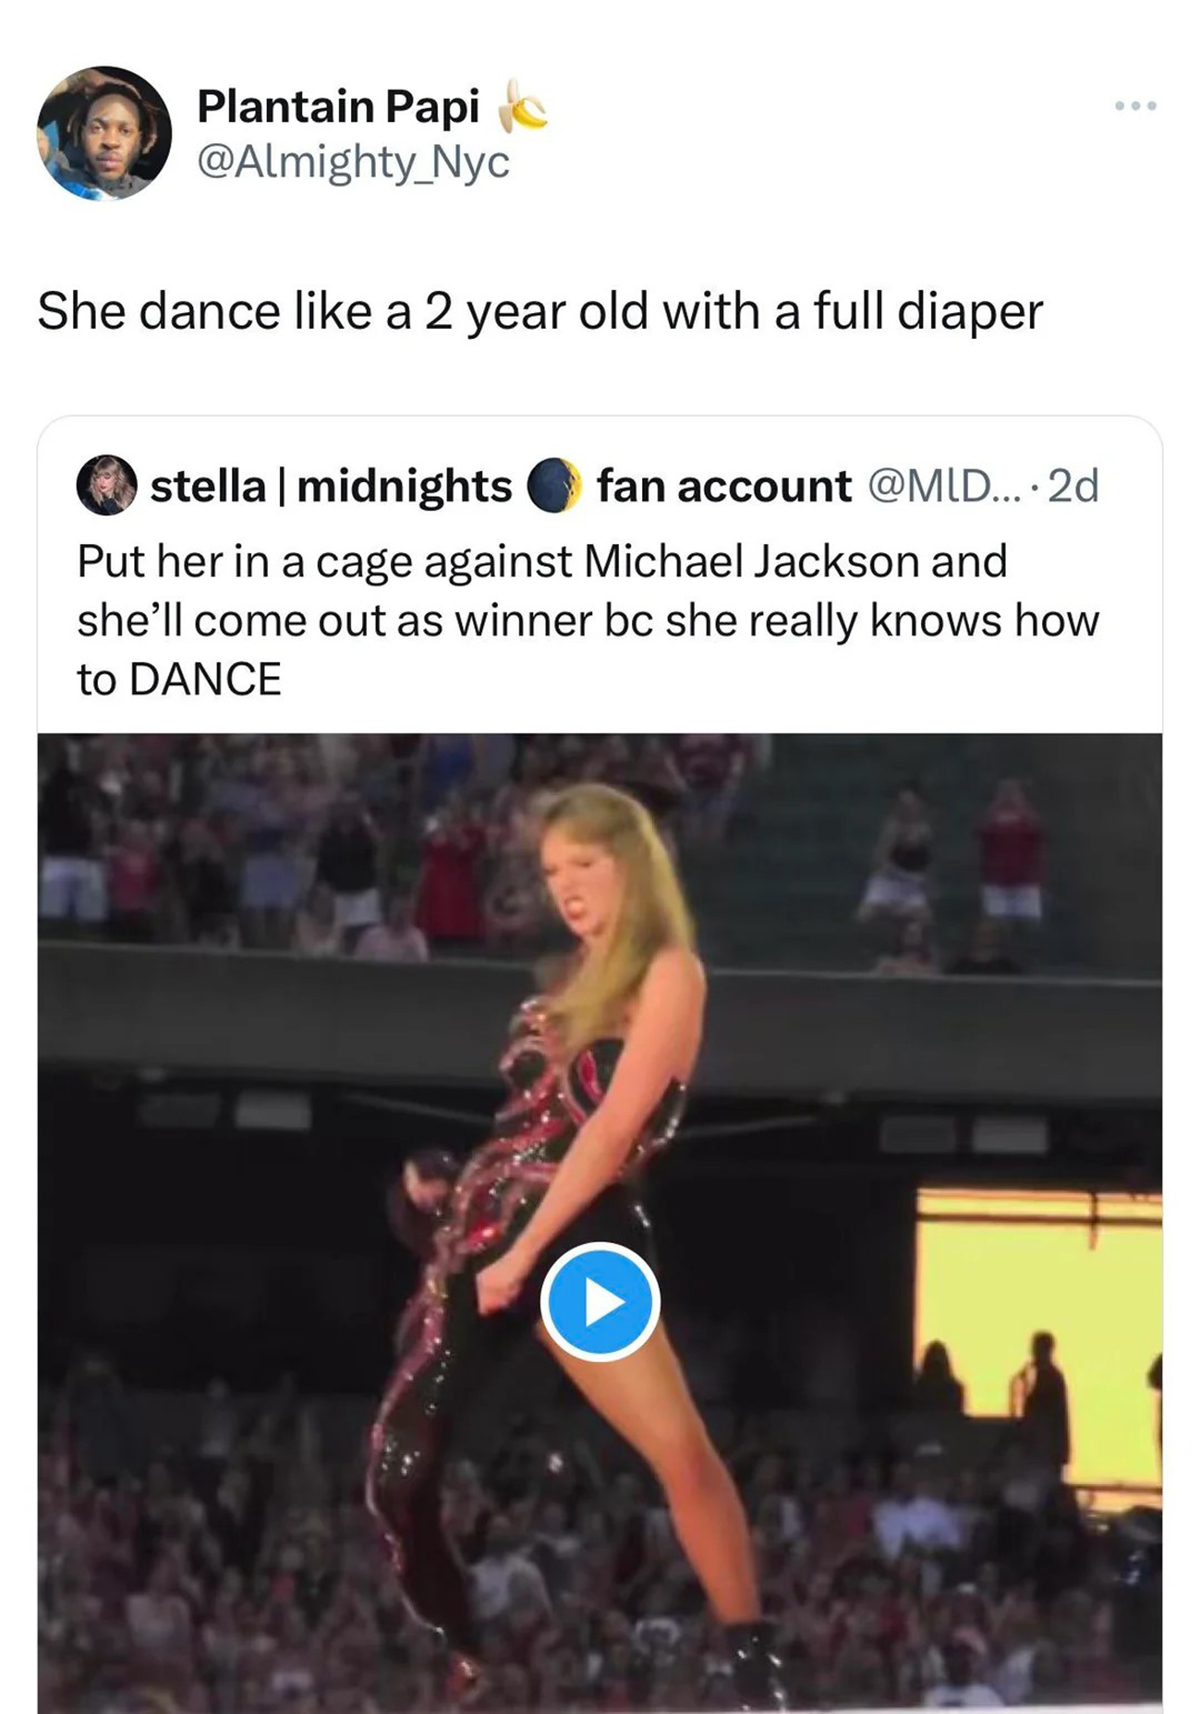 muscle - Plantain Papi Nyc She dance a 2 year old with a full diaper stella | midnights fan account ... 2d Put her in a cage against Michael Jackson and she'll come out as winner bc she really knows how to Dance